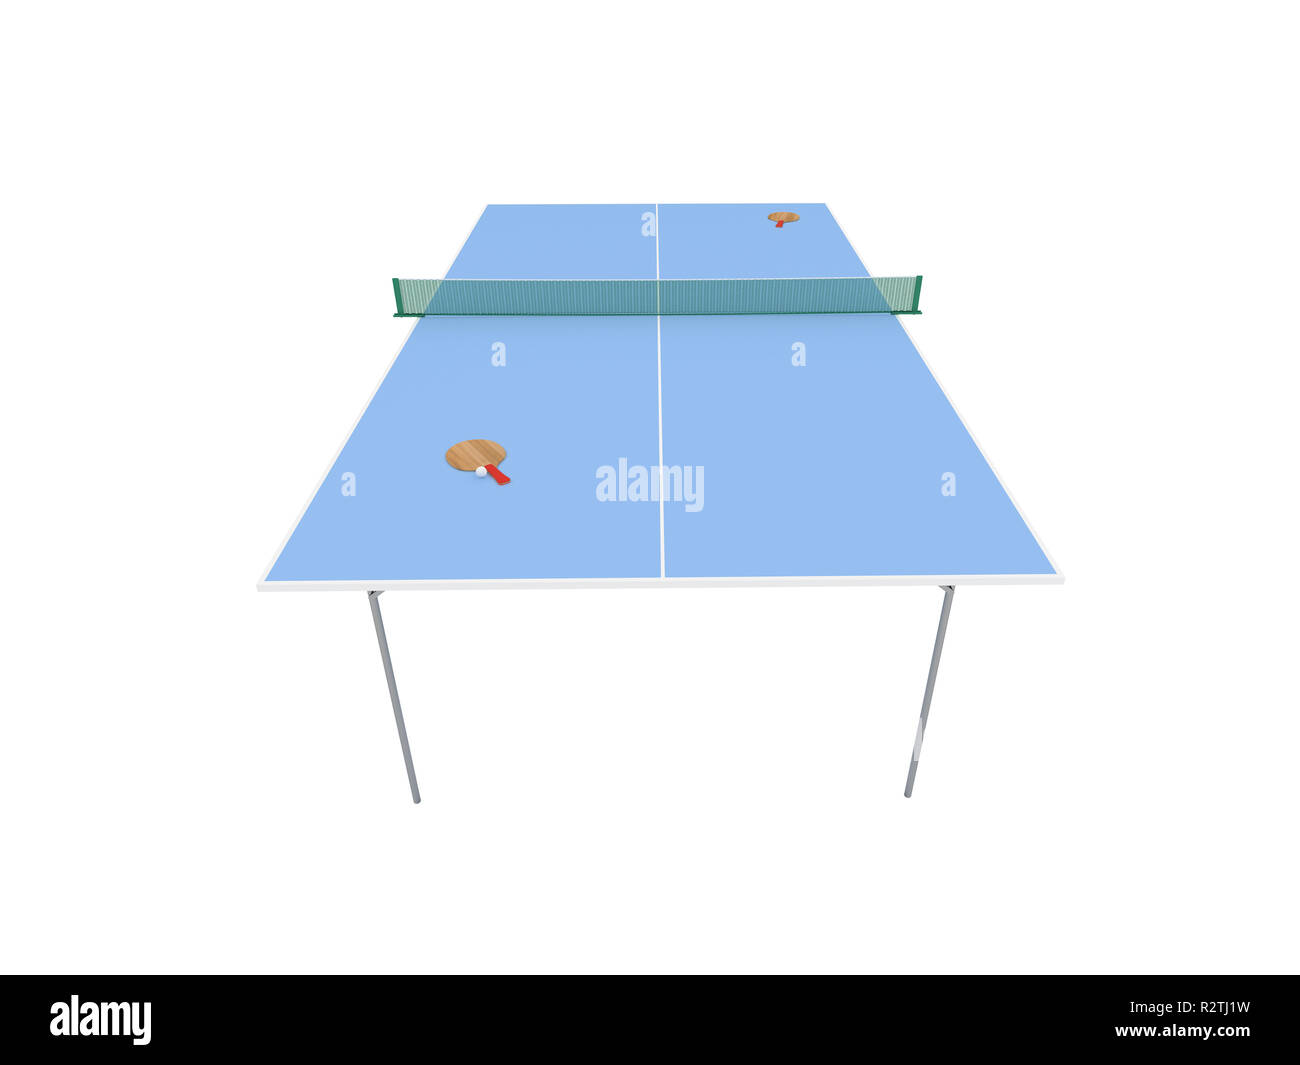 Table tennis Cut Out Stock Images & Pictures - Alamy